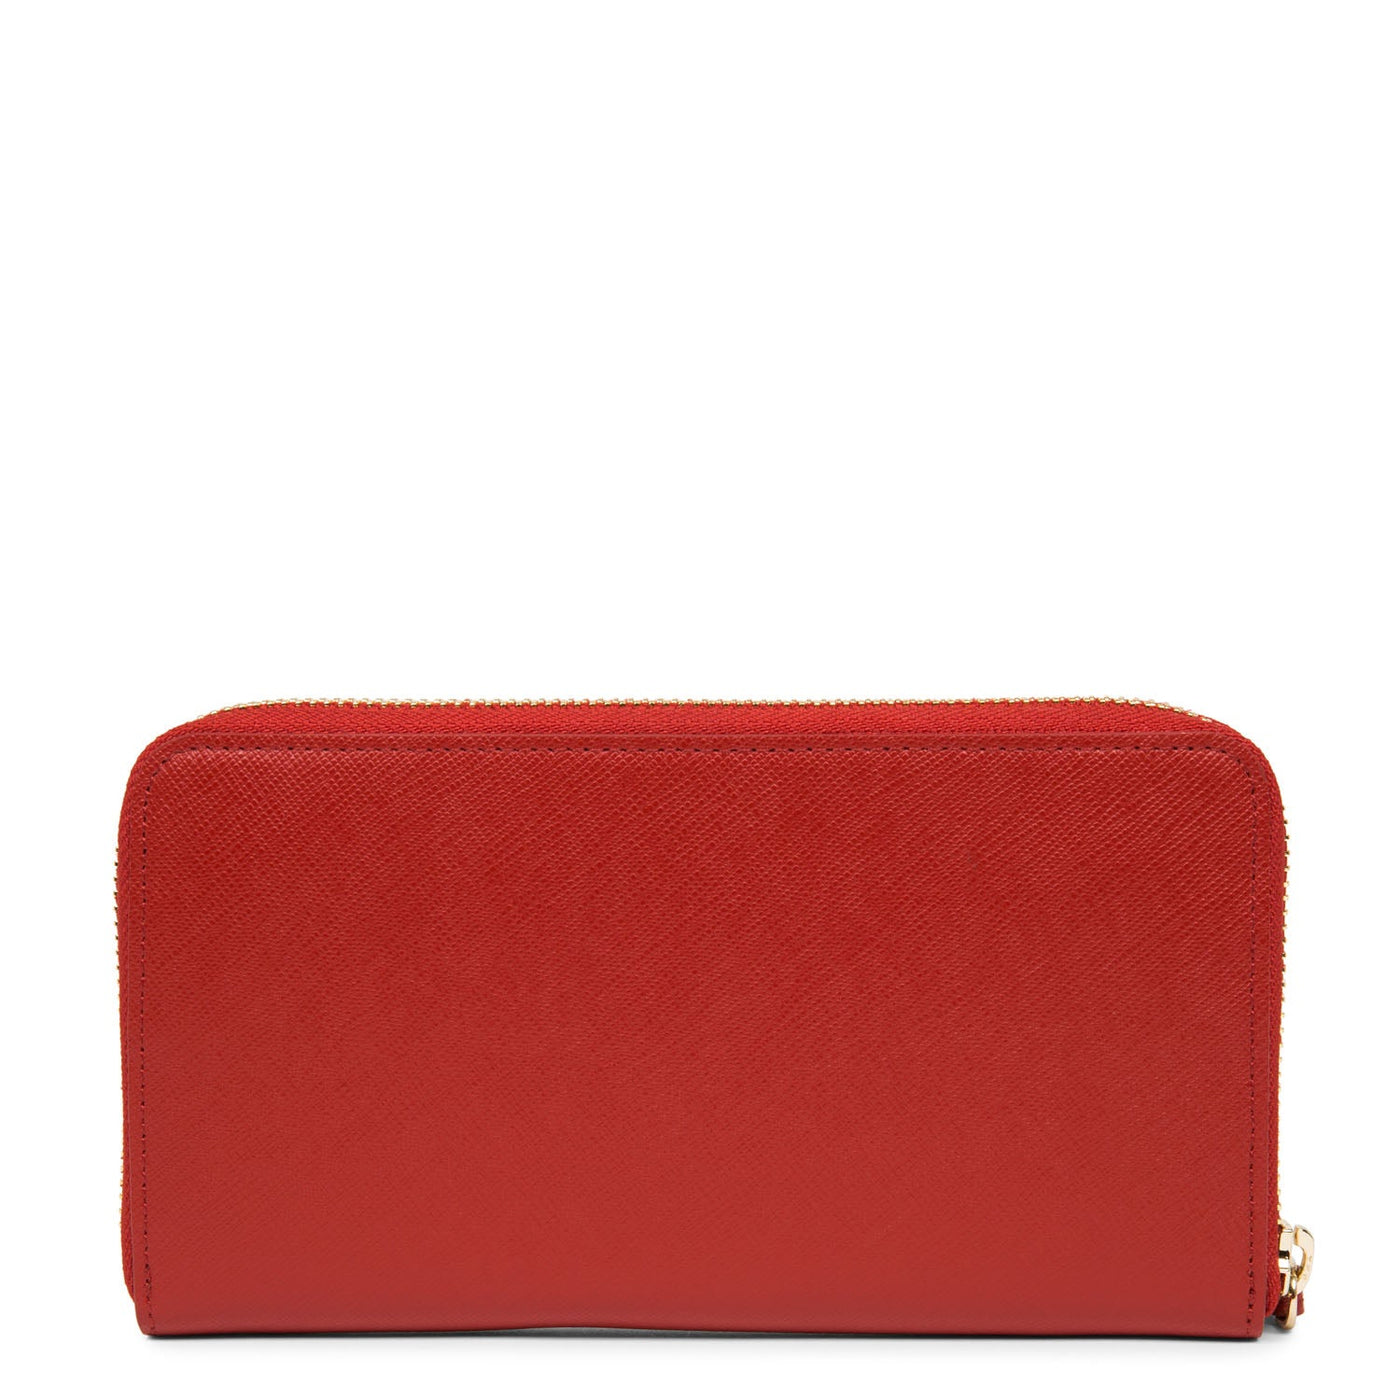 back to back organizer wallet - saffiano signature #couleur_rouge